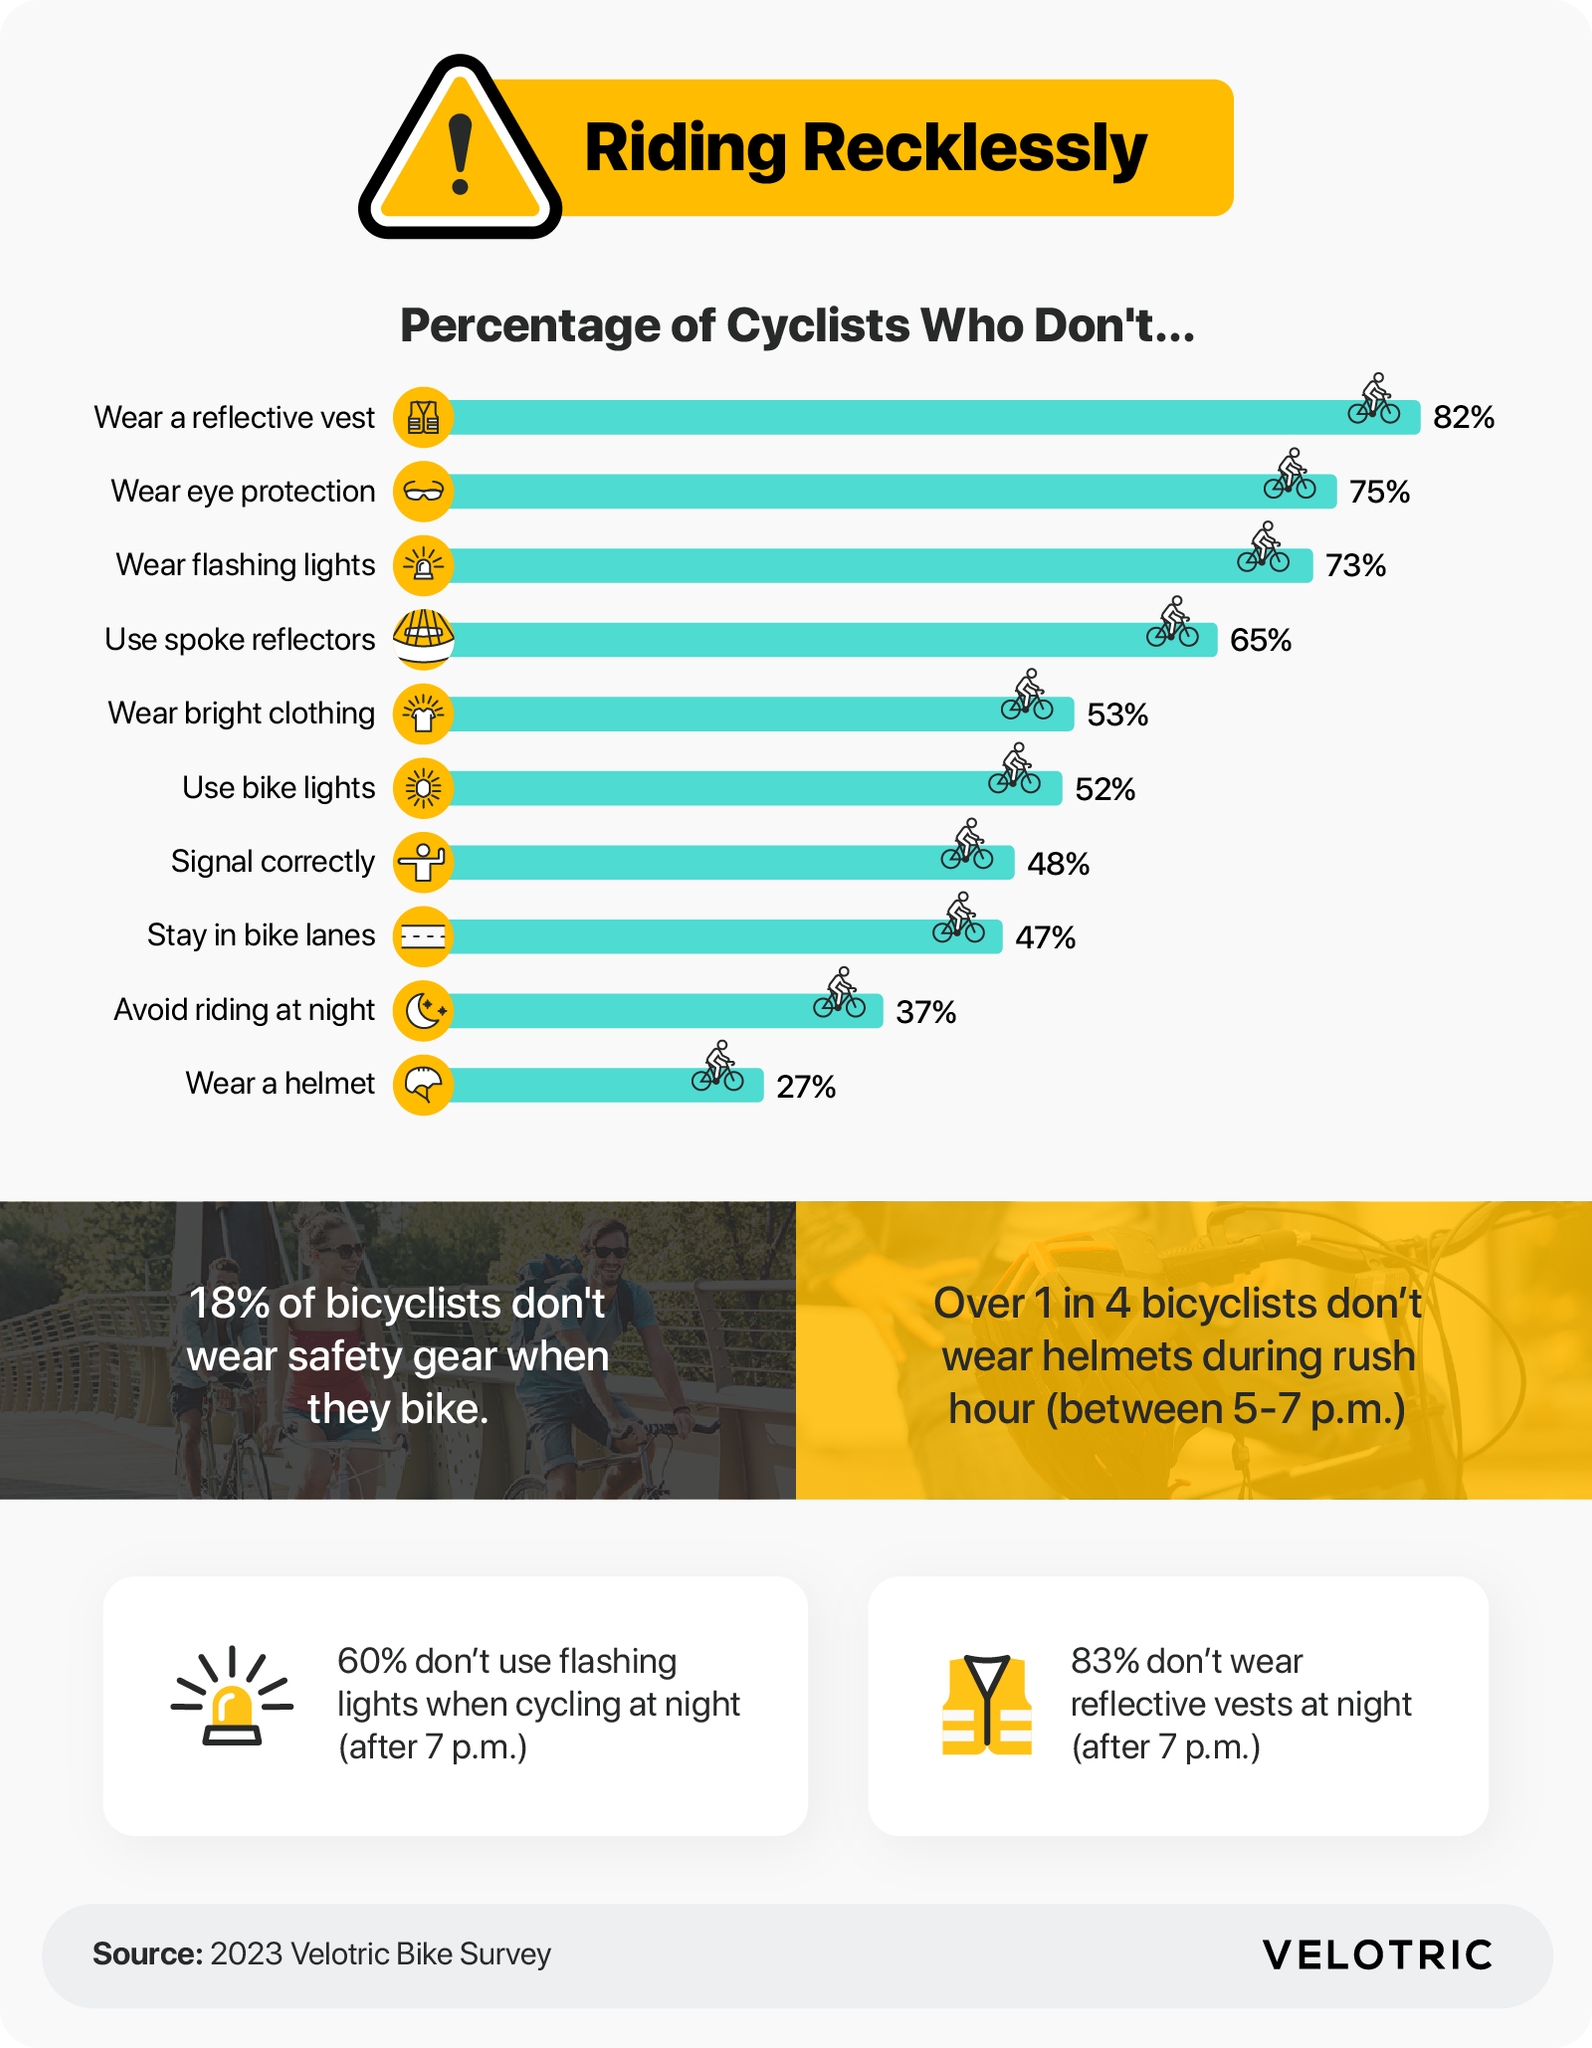 Percentage of cyclists who don't...